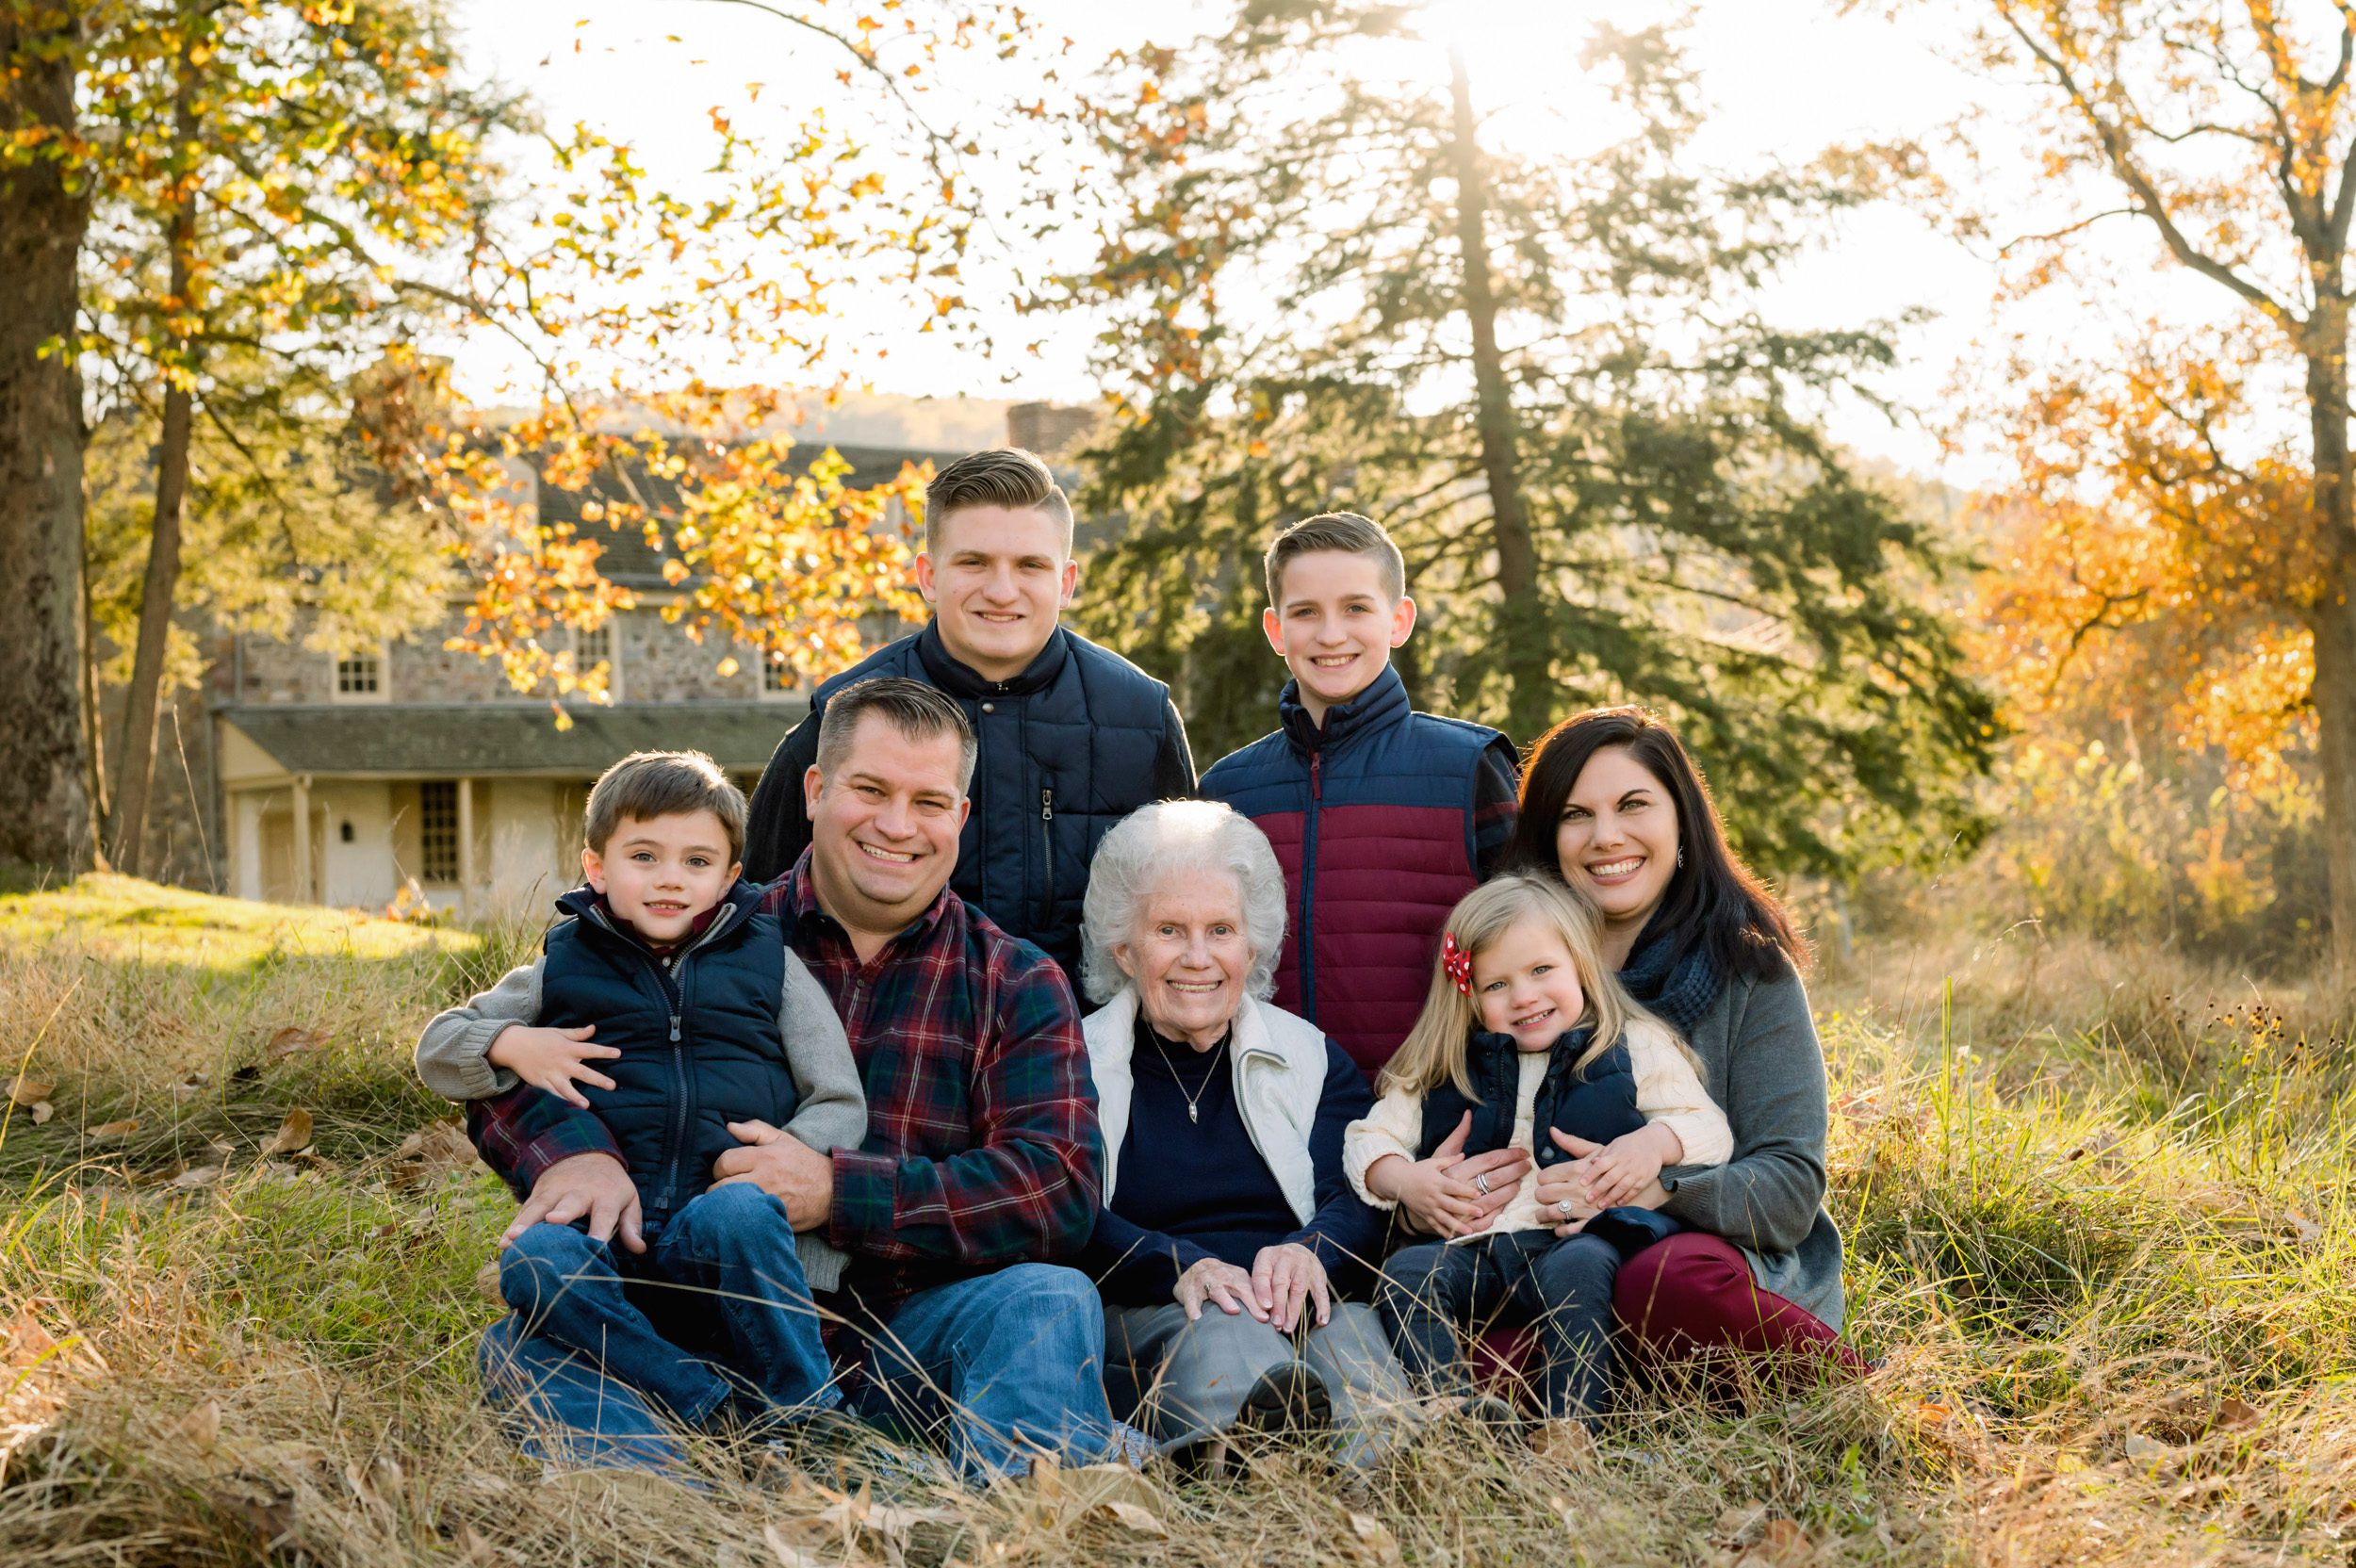 An extended family snuggling together in the grass with the sun shining through the trees in the background during an extended family photo session